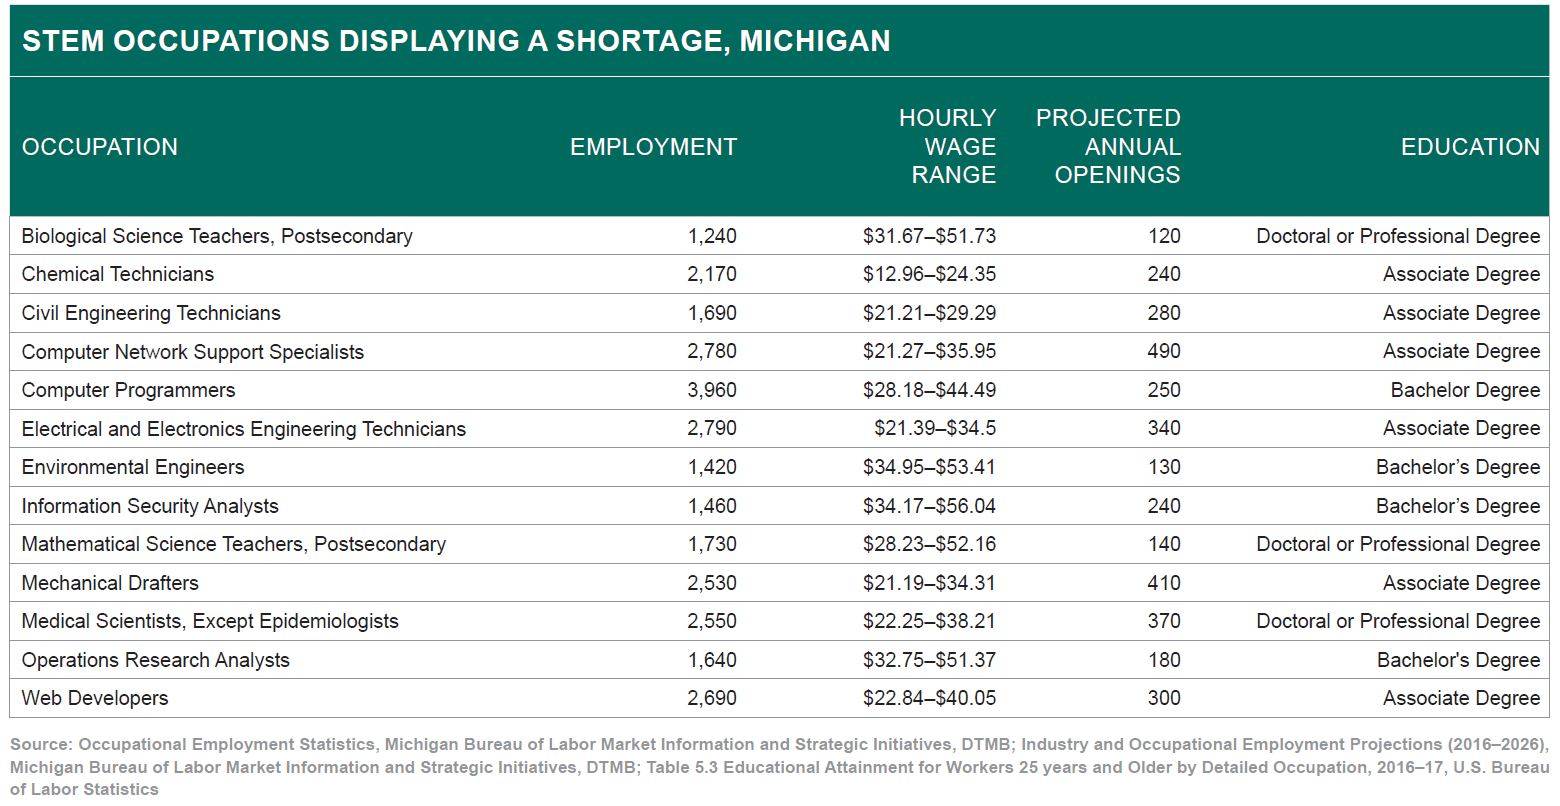 STEM occupations displaying a shortage in Michigan